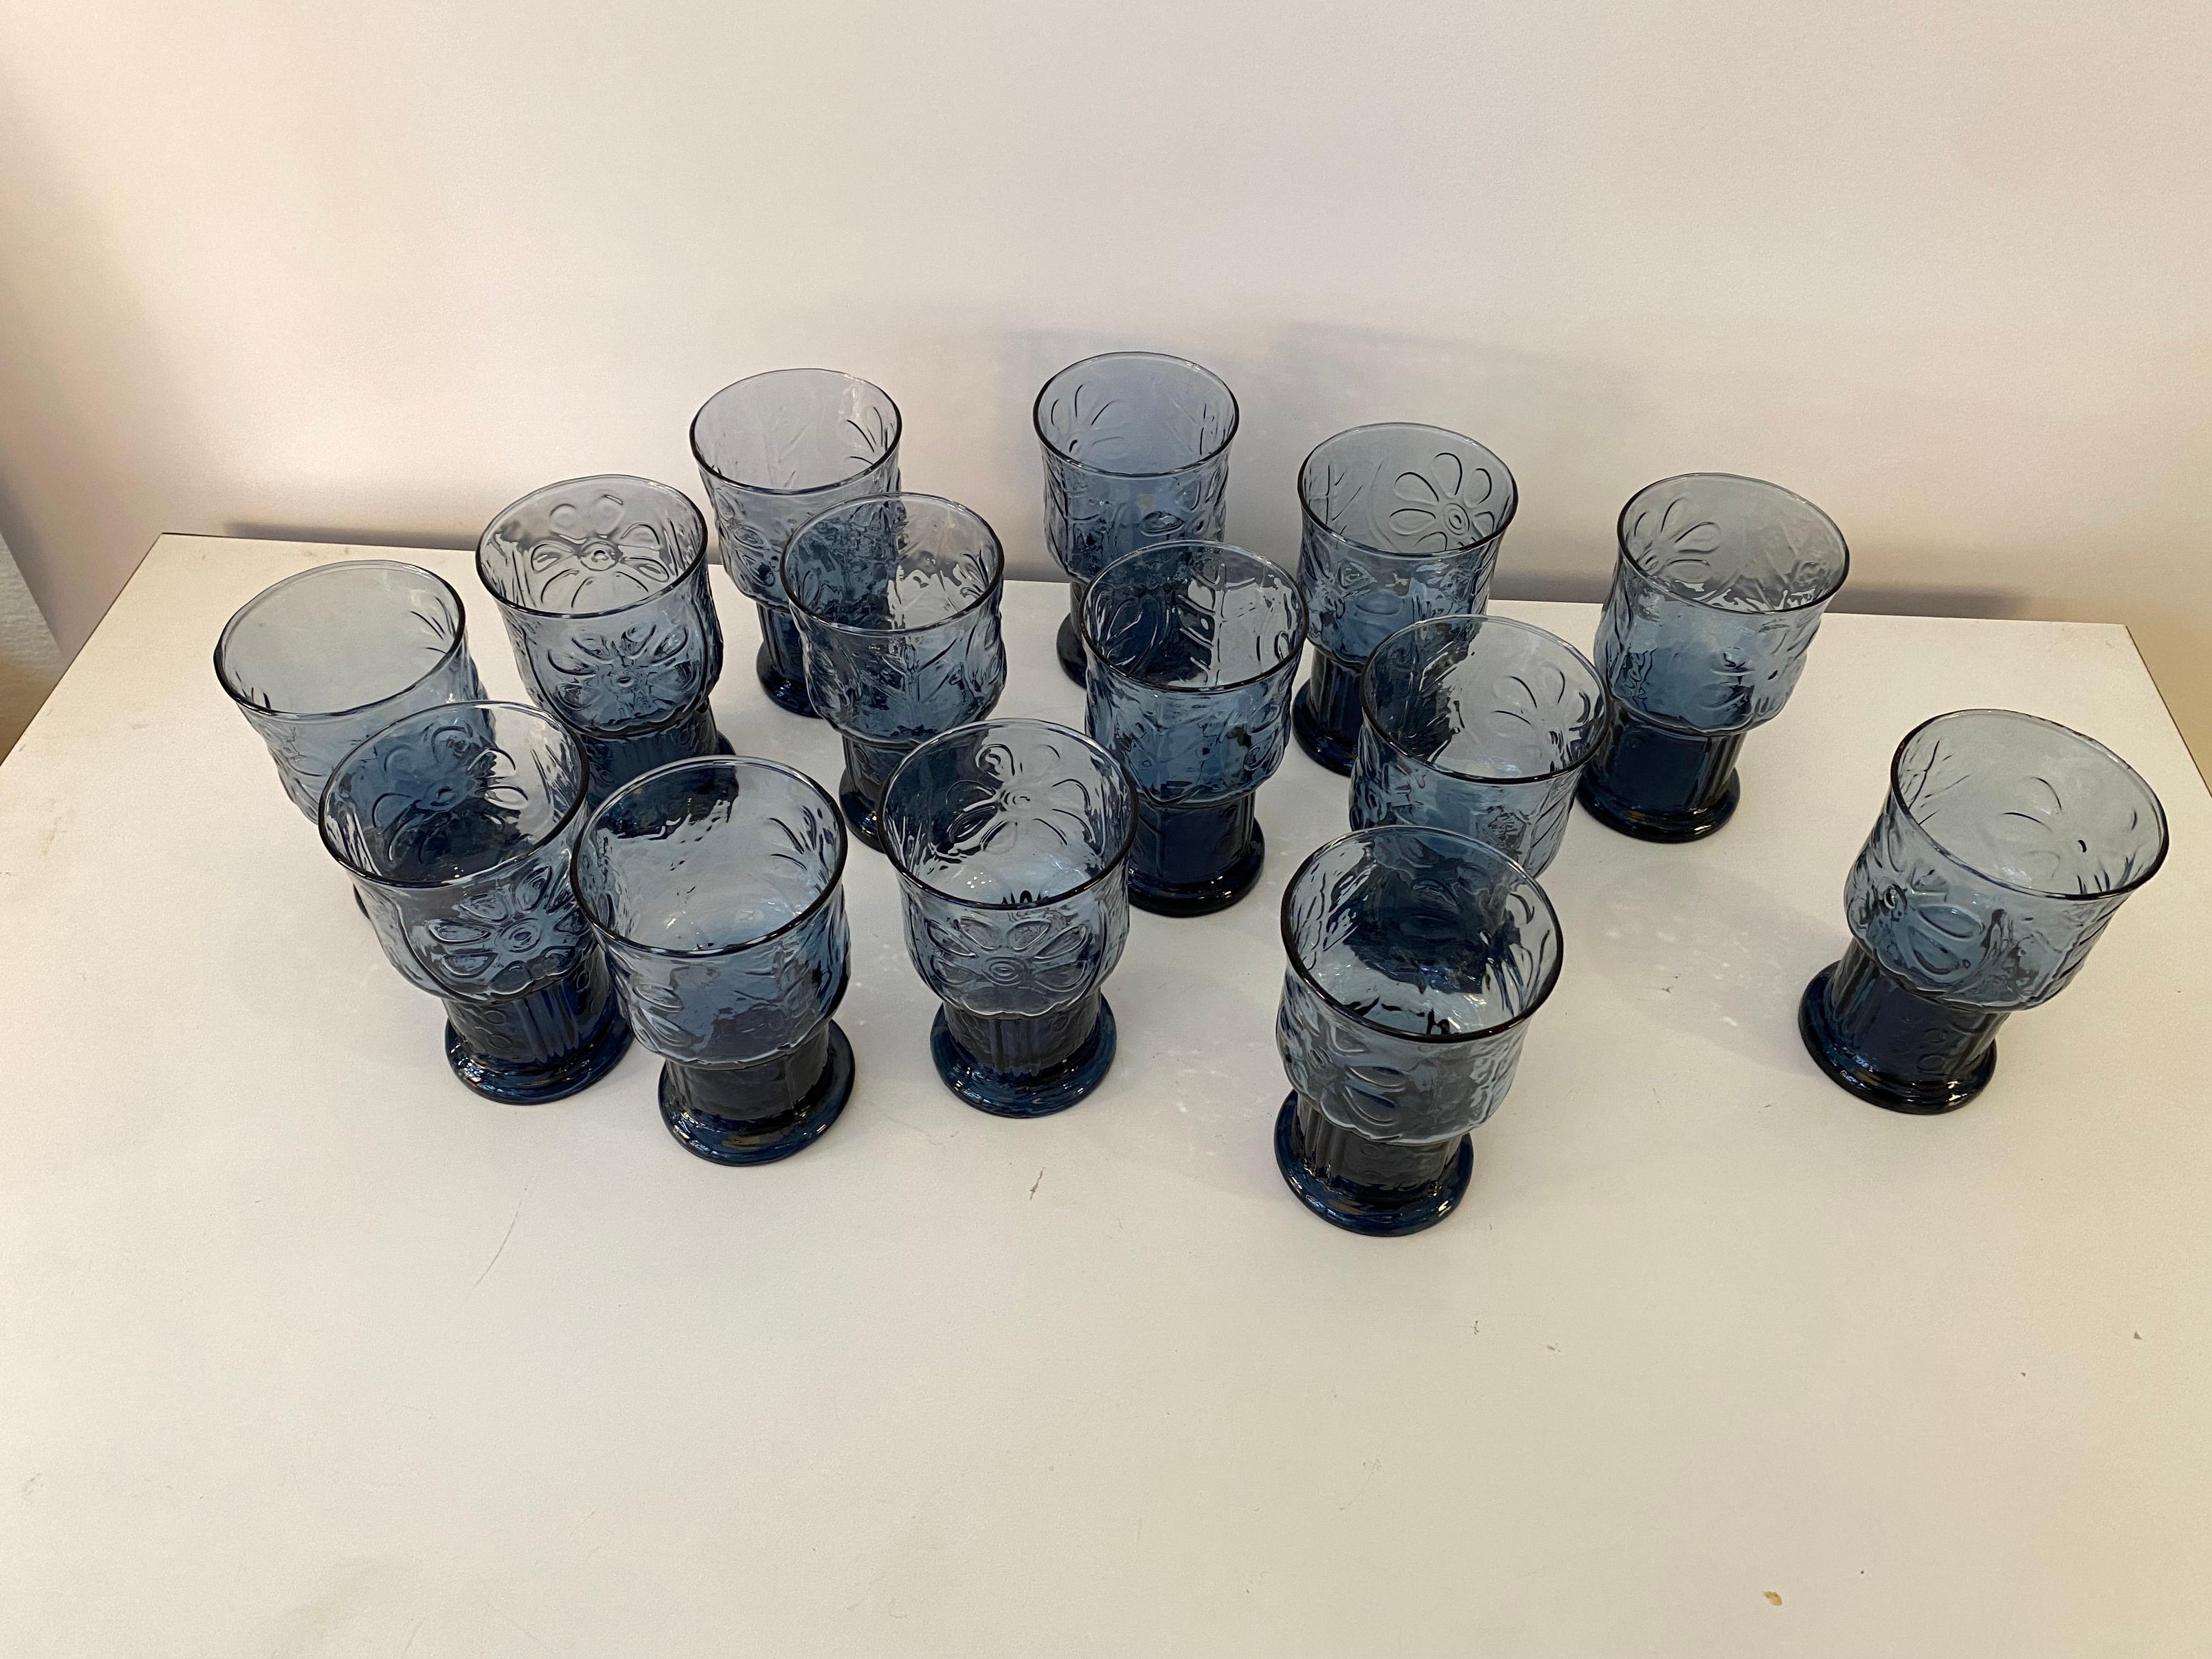 Libbey Glass Company, set of 14 country garden drinking glasses. Glass is a light blue, with a slightly footed base design. Classic 1970's Chic!